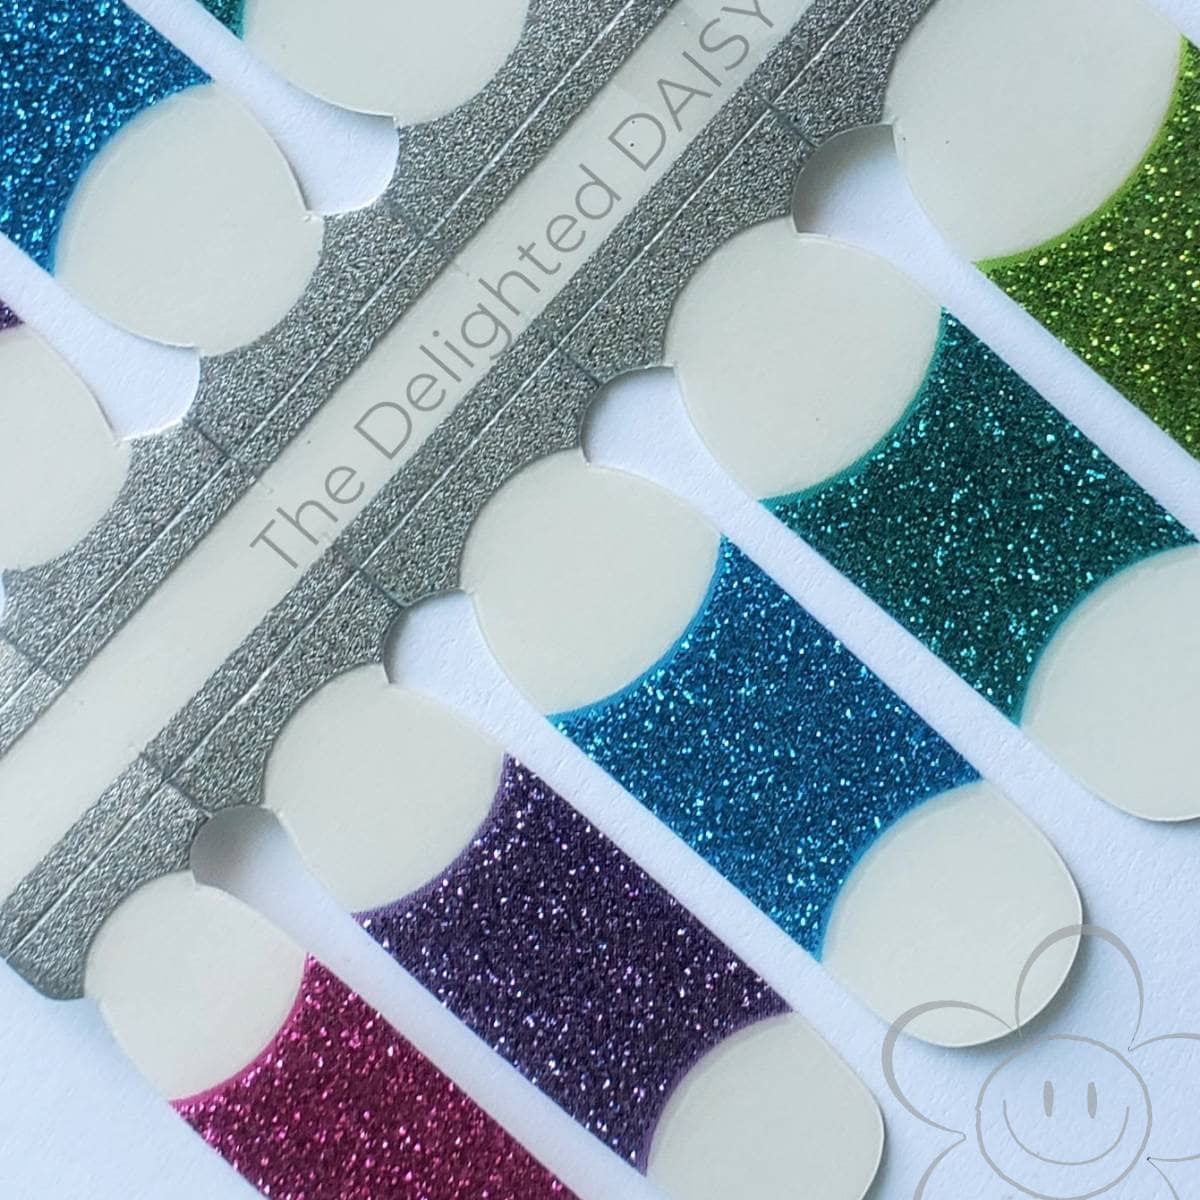 French Rainbow Brite Nail Wraps, Strips, Stickers, Nailart von Etsy - TheDelightedDaisy